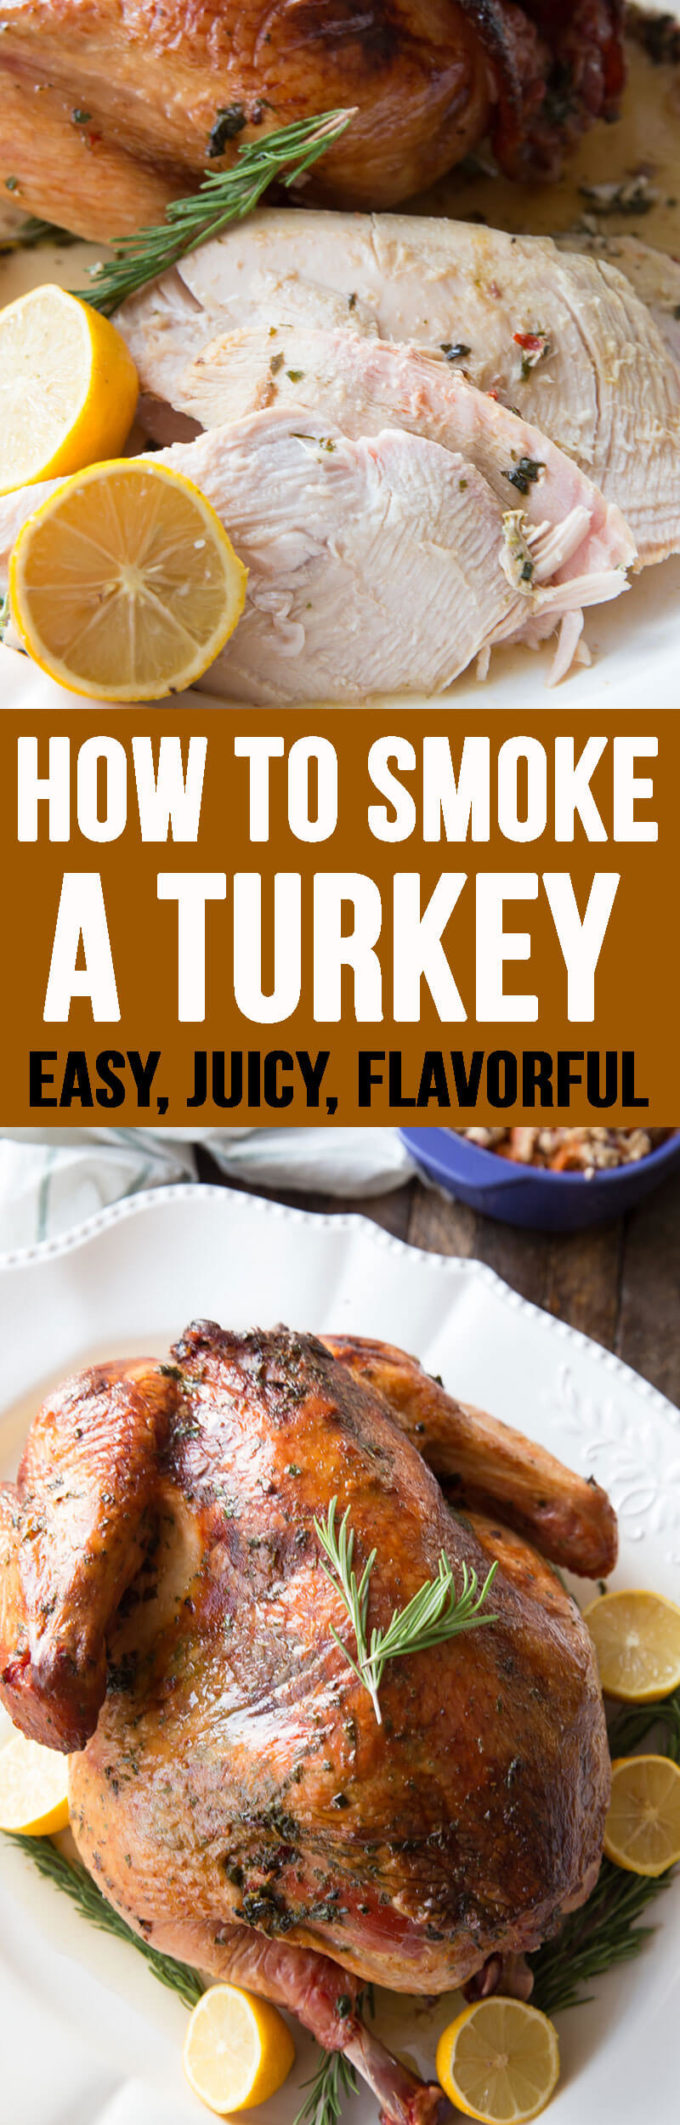 How Long to Smoke a Turkey: The perfect way to create juicy, flavorful, mouthwatering turkey for Thanksgiving, or any other time of year! This is hands down the best turkey I have ever had.